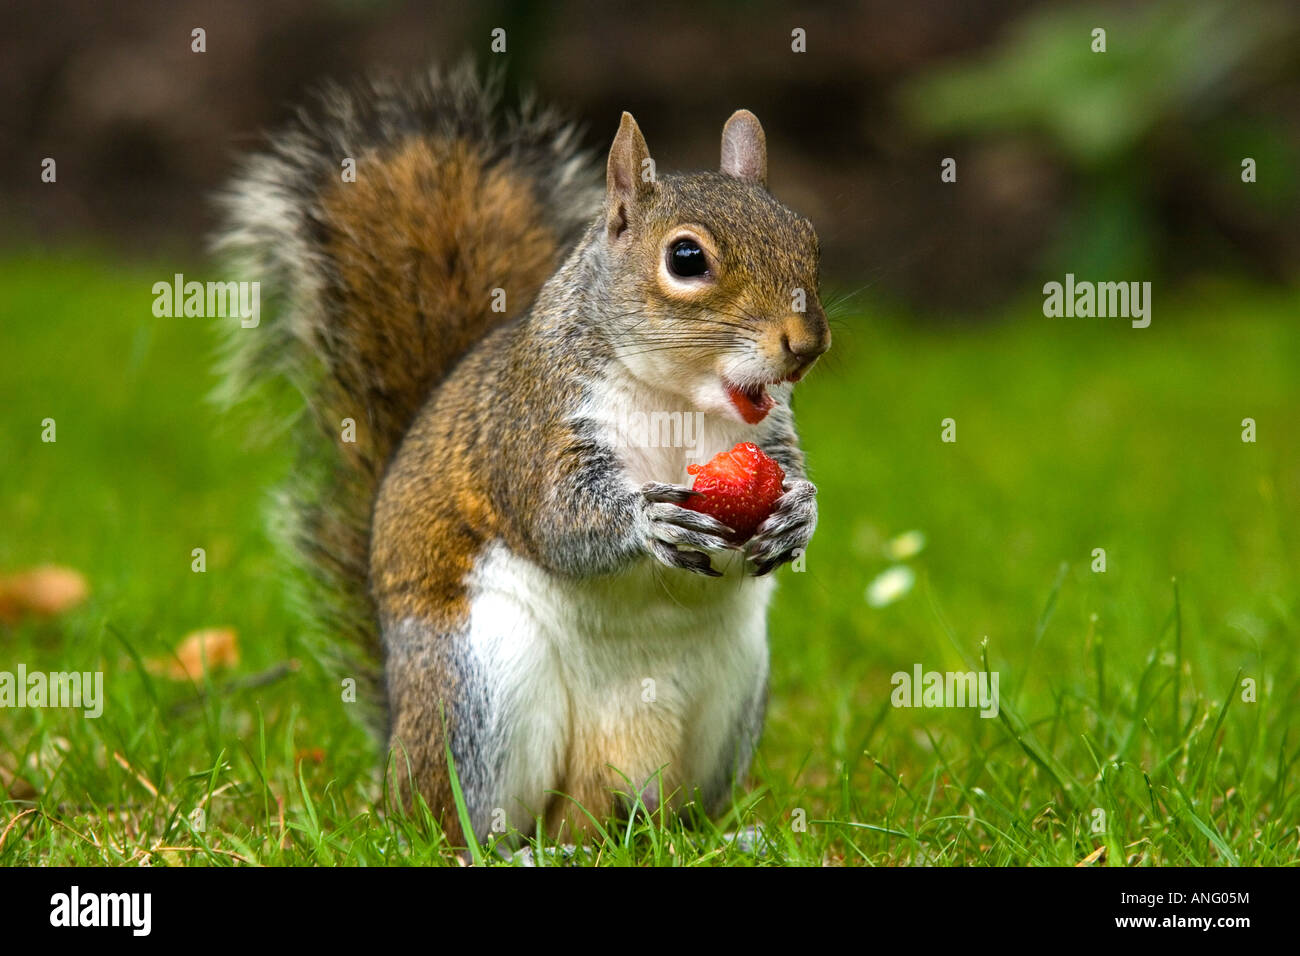 Squirrel eating strawberry Banque D'Images